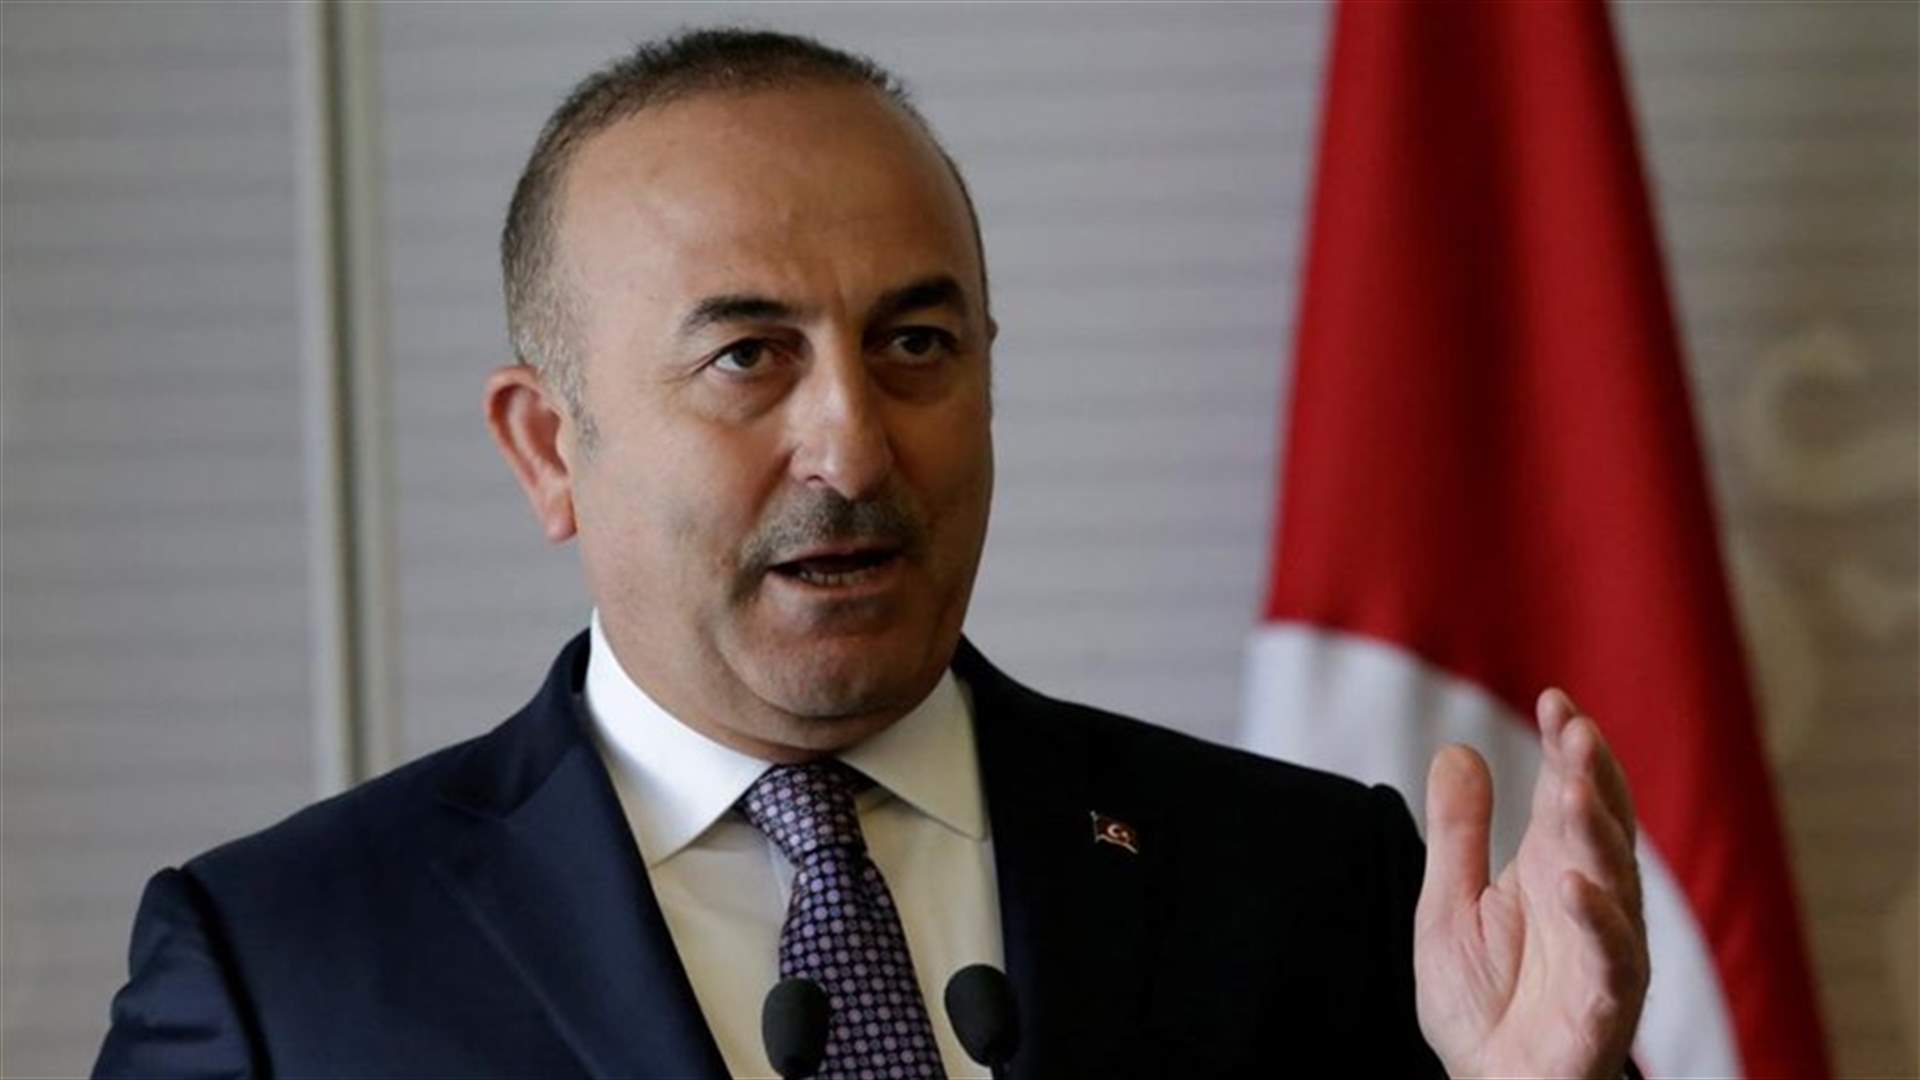 Turkey has not shared audio recordings with anyone -CNN Turk citing foreign minister